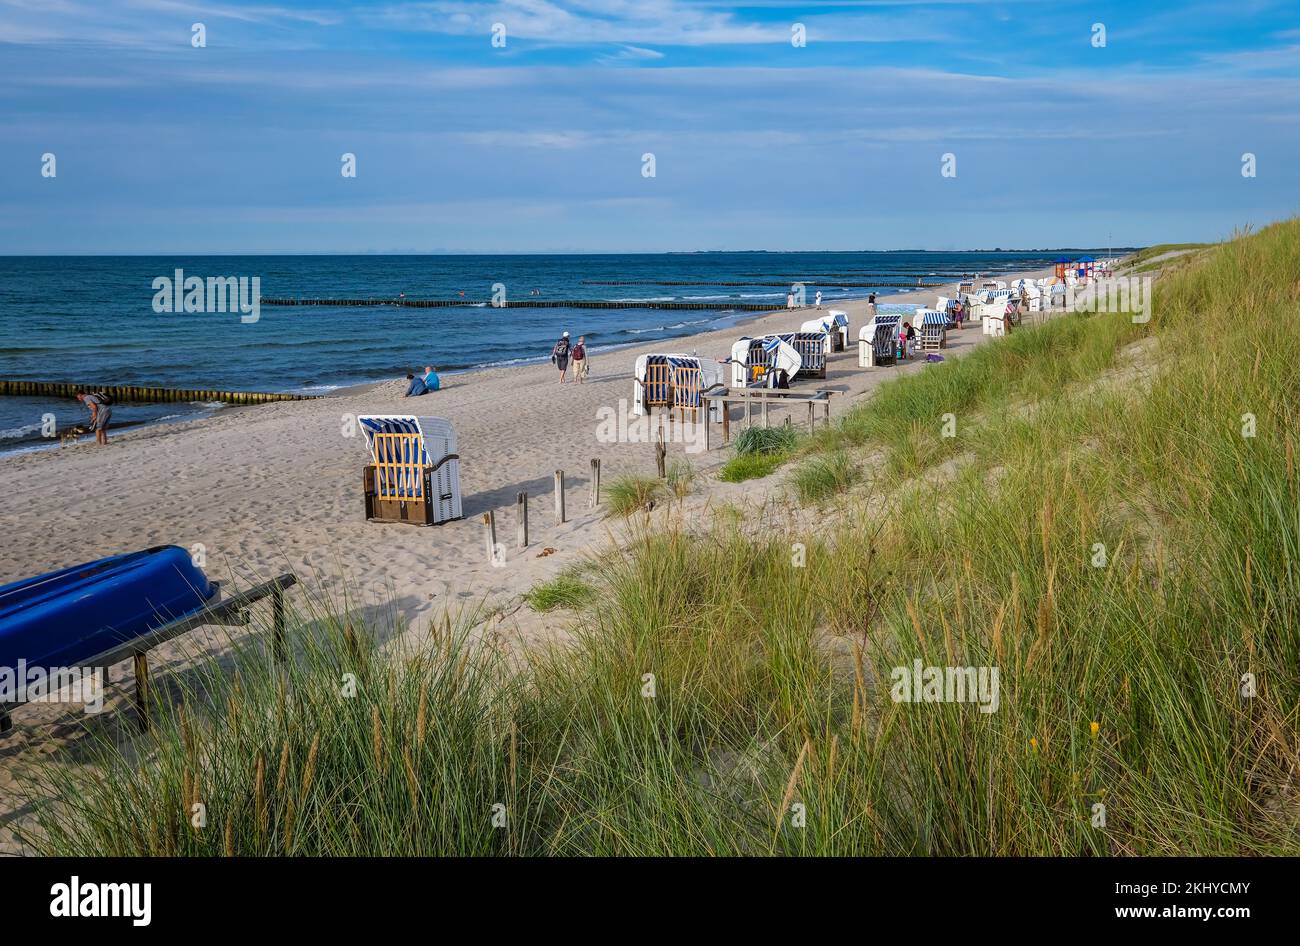 Graal-Mueritz, Mecklenburg-Vorpommern, Germany - Beach beacons on the sandy beach of the Baltic Sea spa Graal-Mueritz. Few people on the beach. The Me Stock Photo